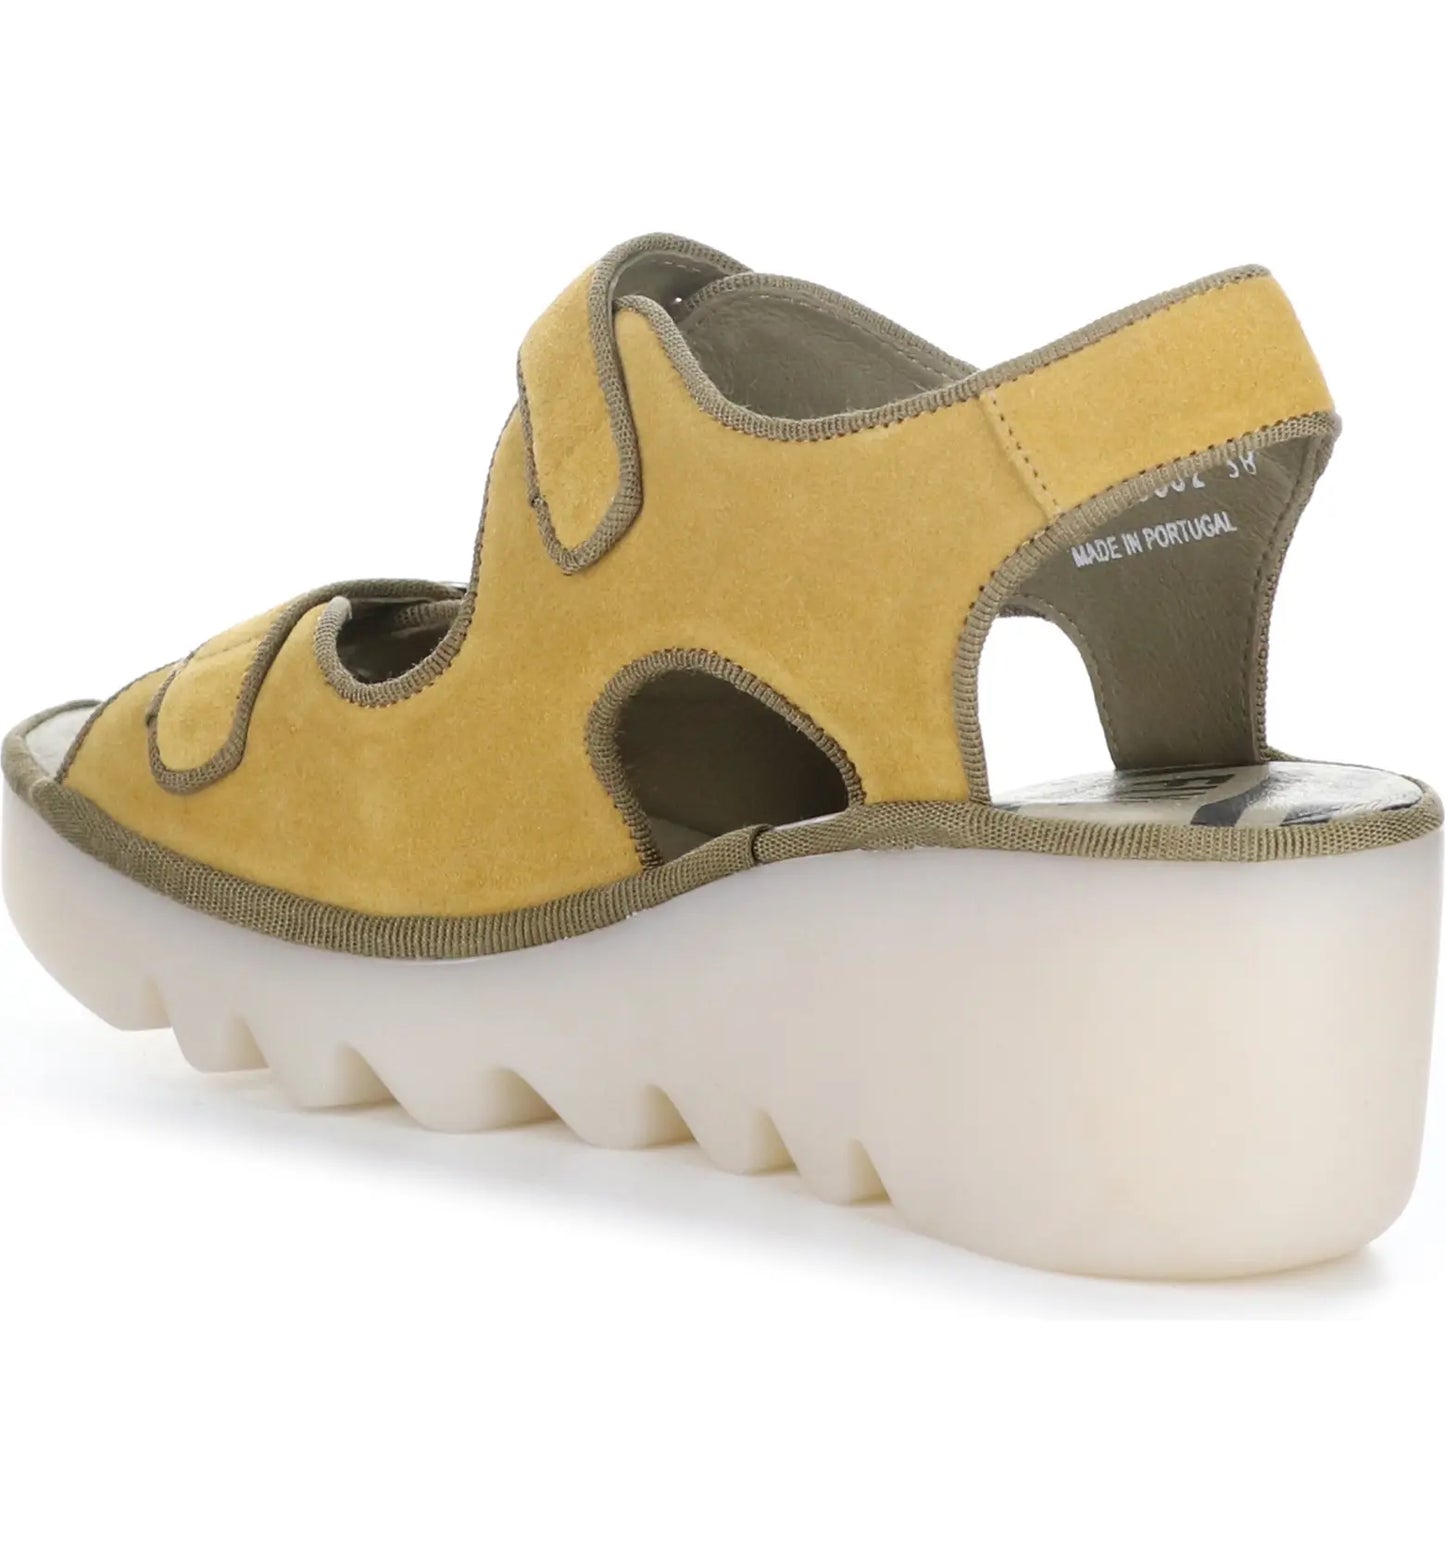 Fly London golden honey suede leather upper sandal features a hook and loop adjustable upper strap (buckle adjusts too) and a buckle lower strap. On a 3 inch shock absorbing wedge sole.  Made in Portugal